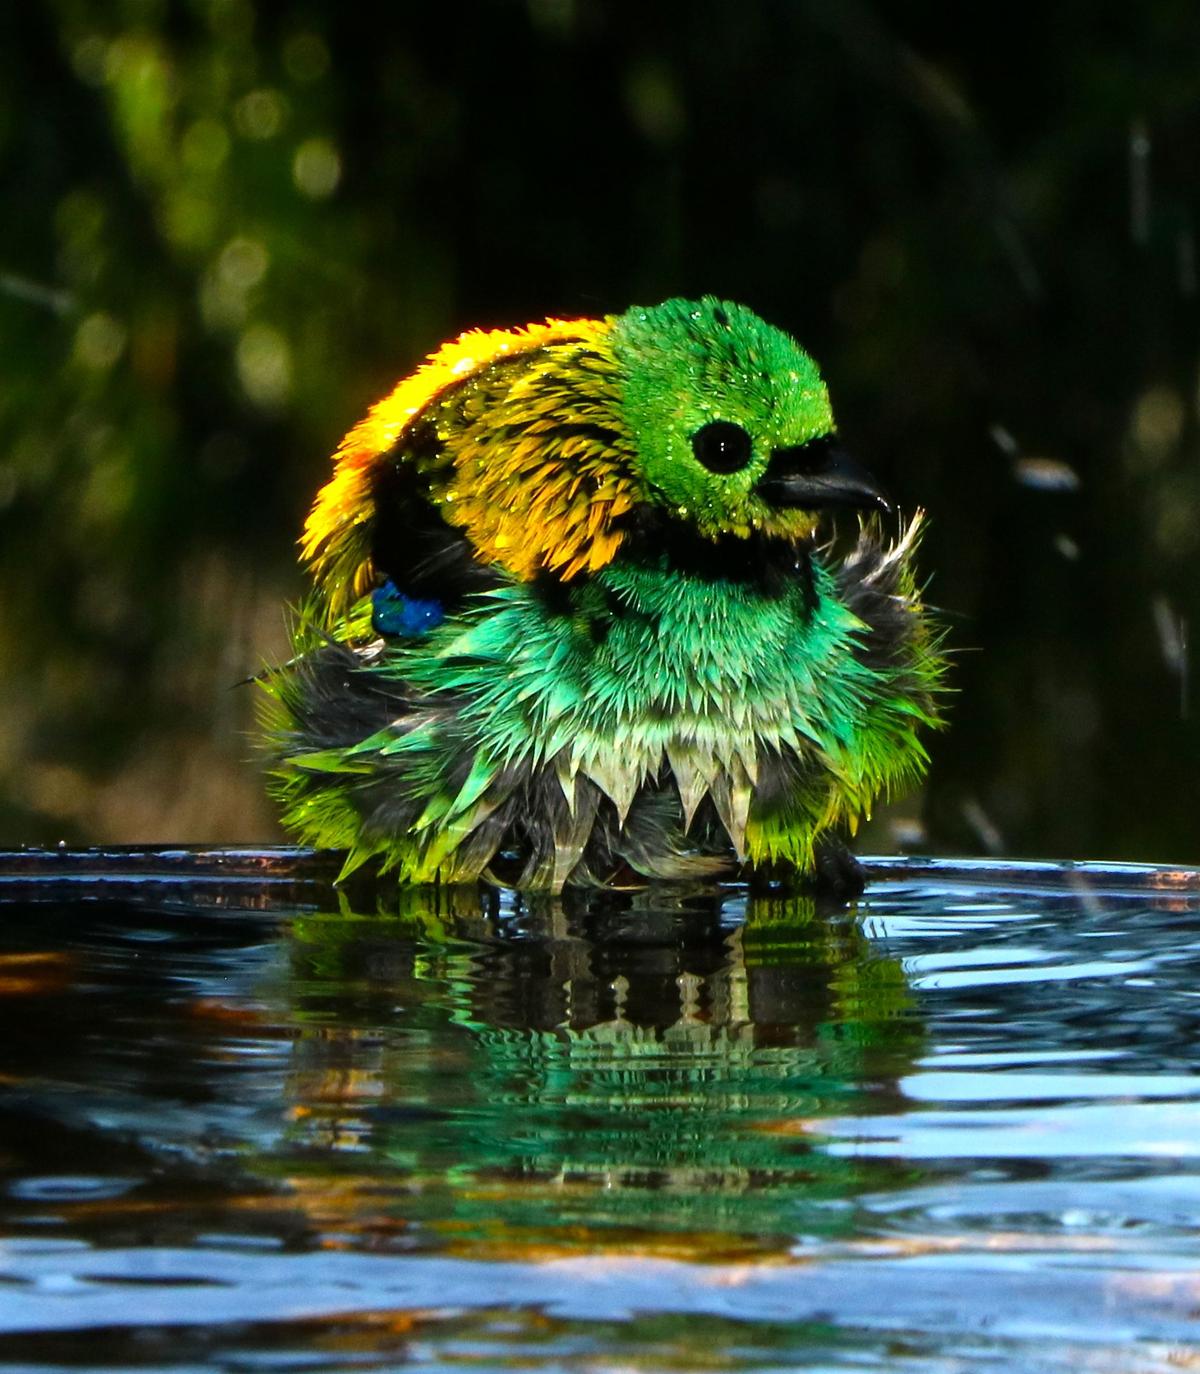 "TANAGER REFLECTIONS." (Courtesy of <a href="http://www.christianspencer.pro.br/PhotosNEW/index.html">Christian Spencer</a>)